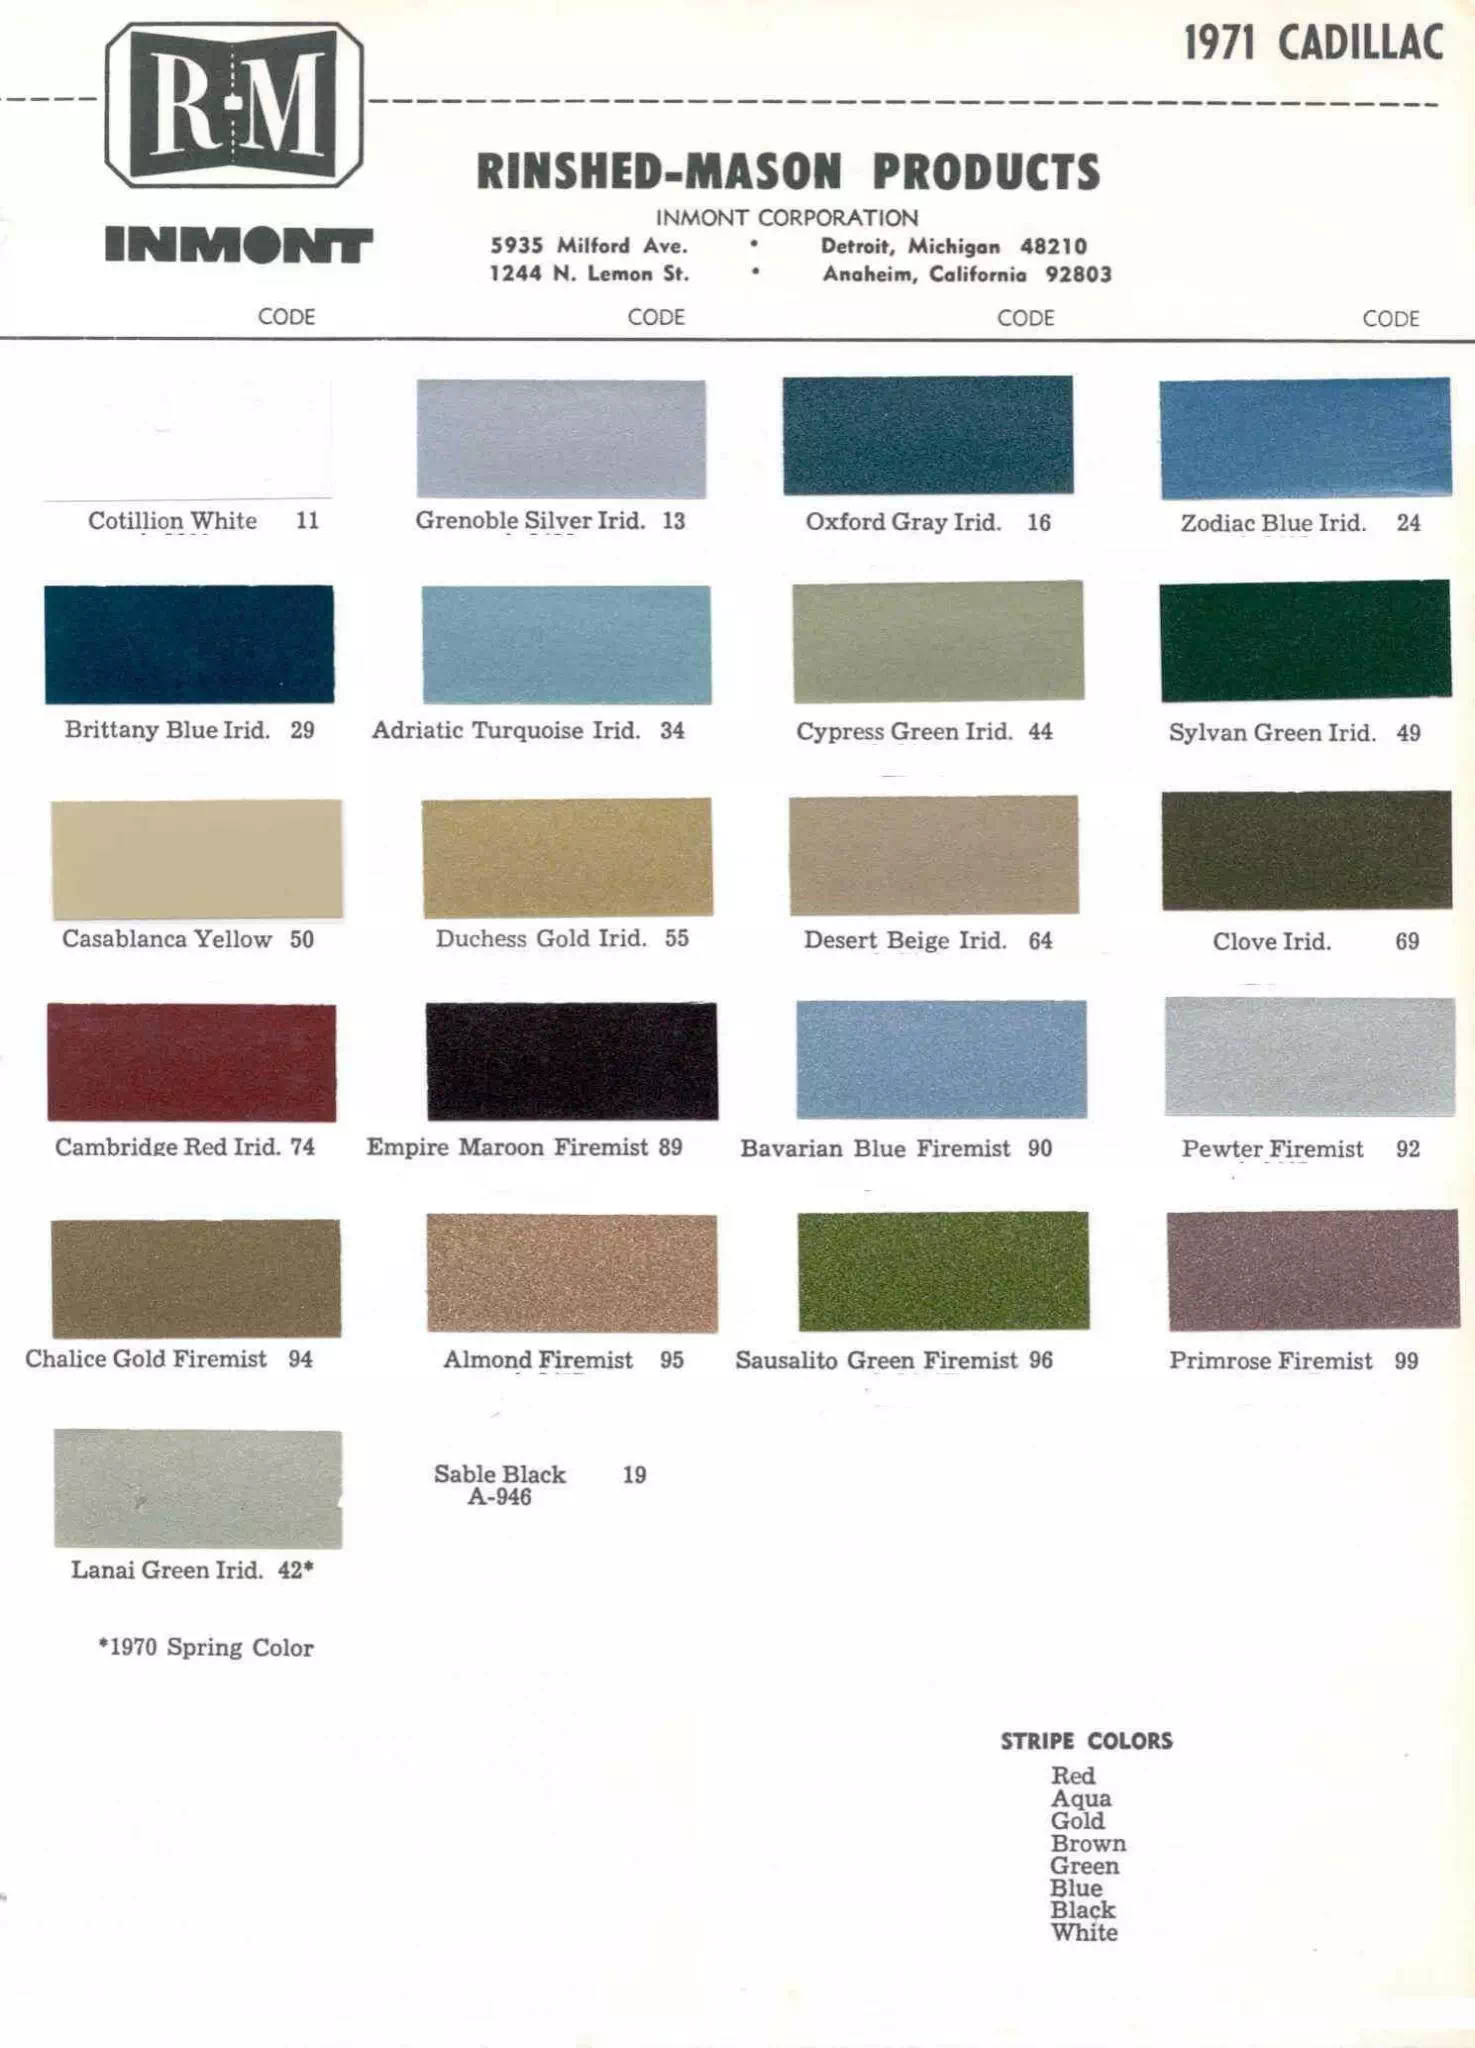 Color Codes and Color Swatch Examples of the Oem Paint from 1971